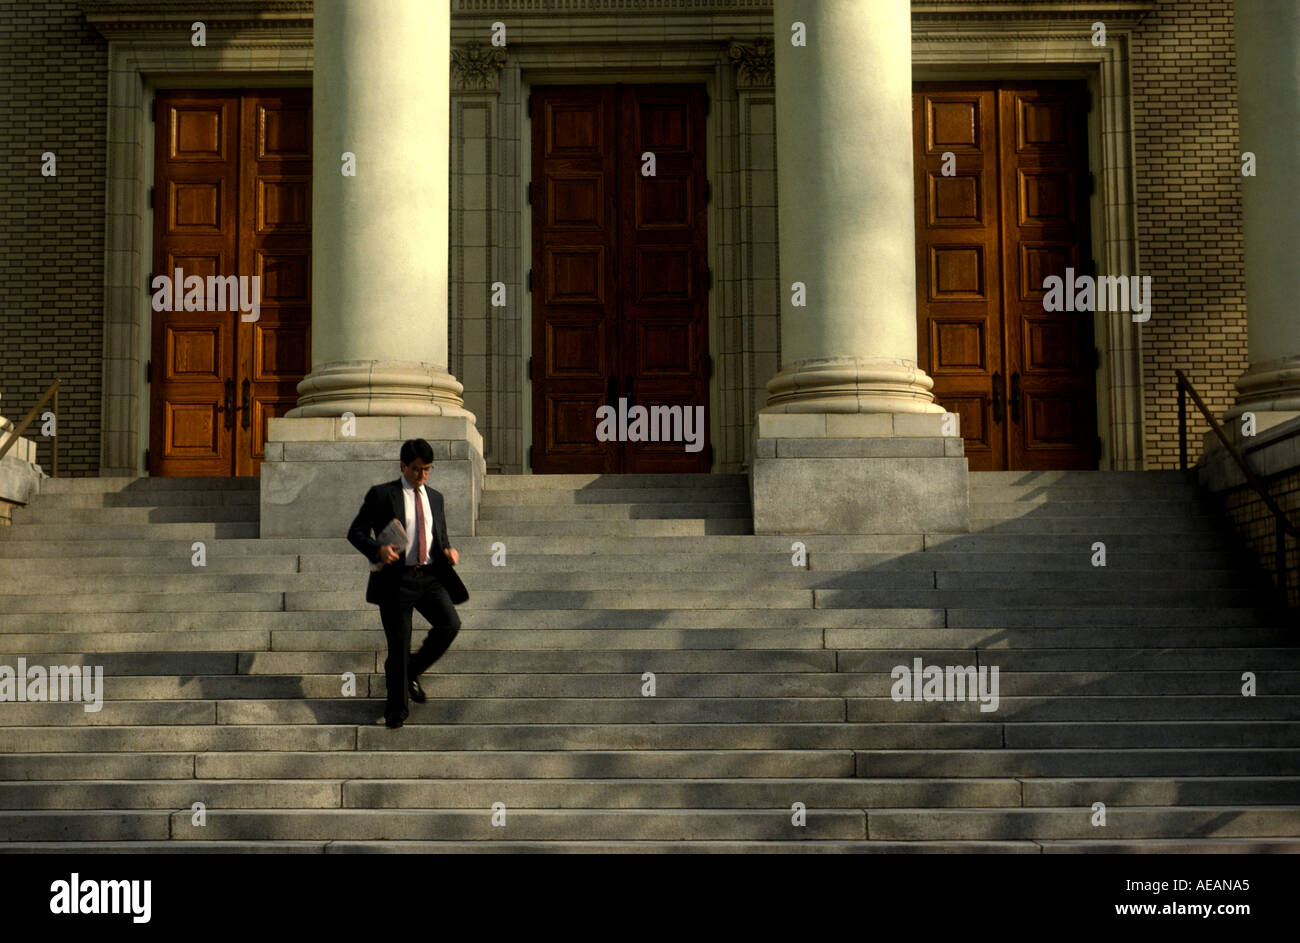 A lawyer leaves the courthouse on his way back to his office Stock Photo